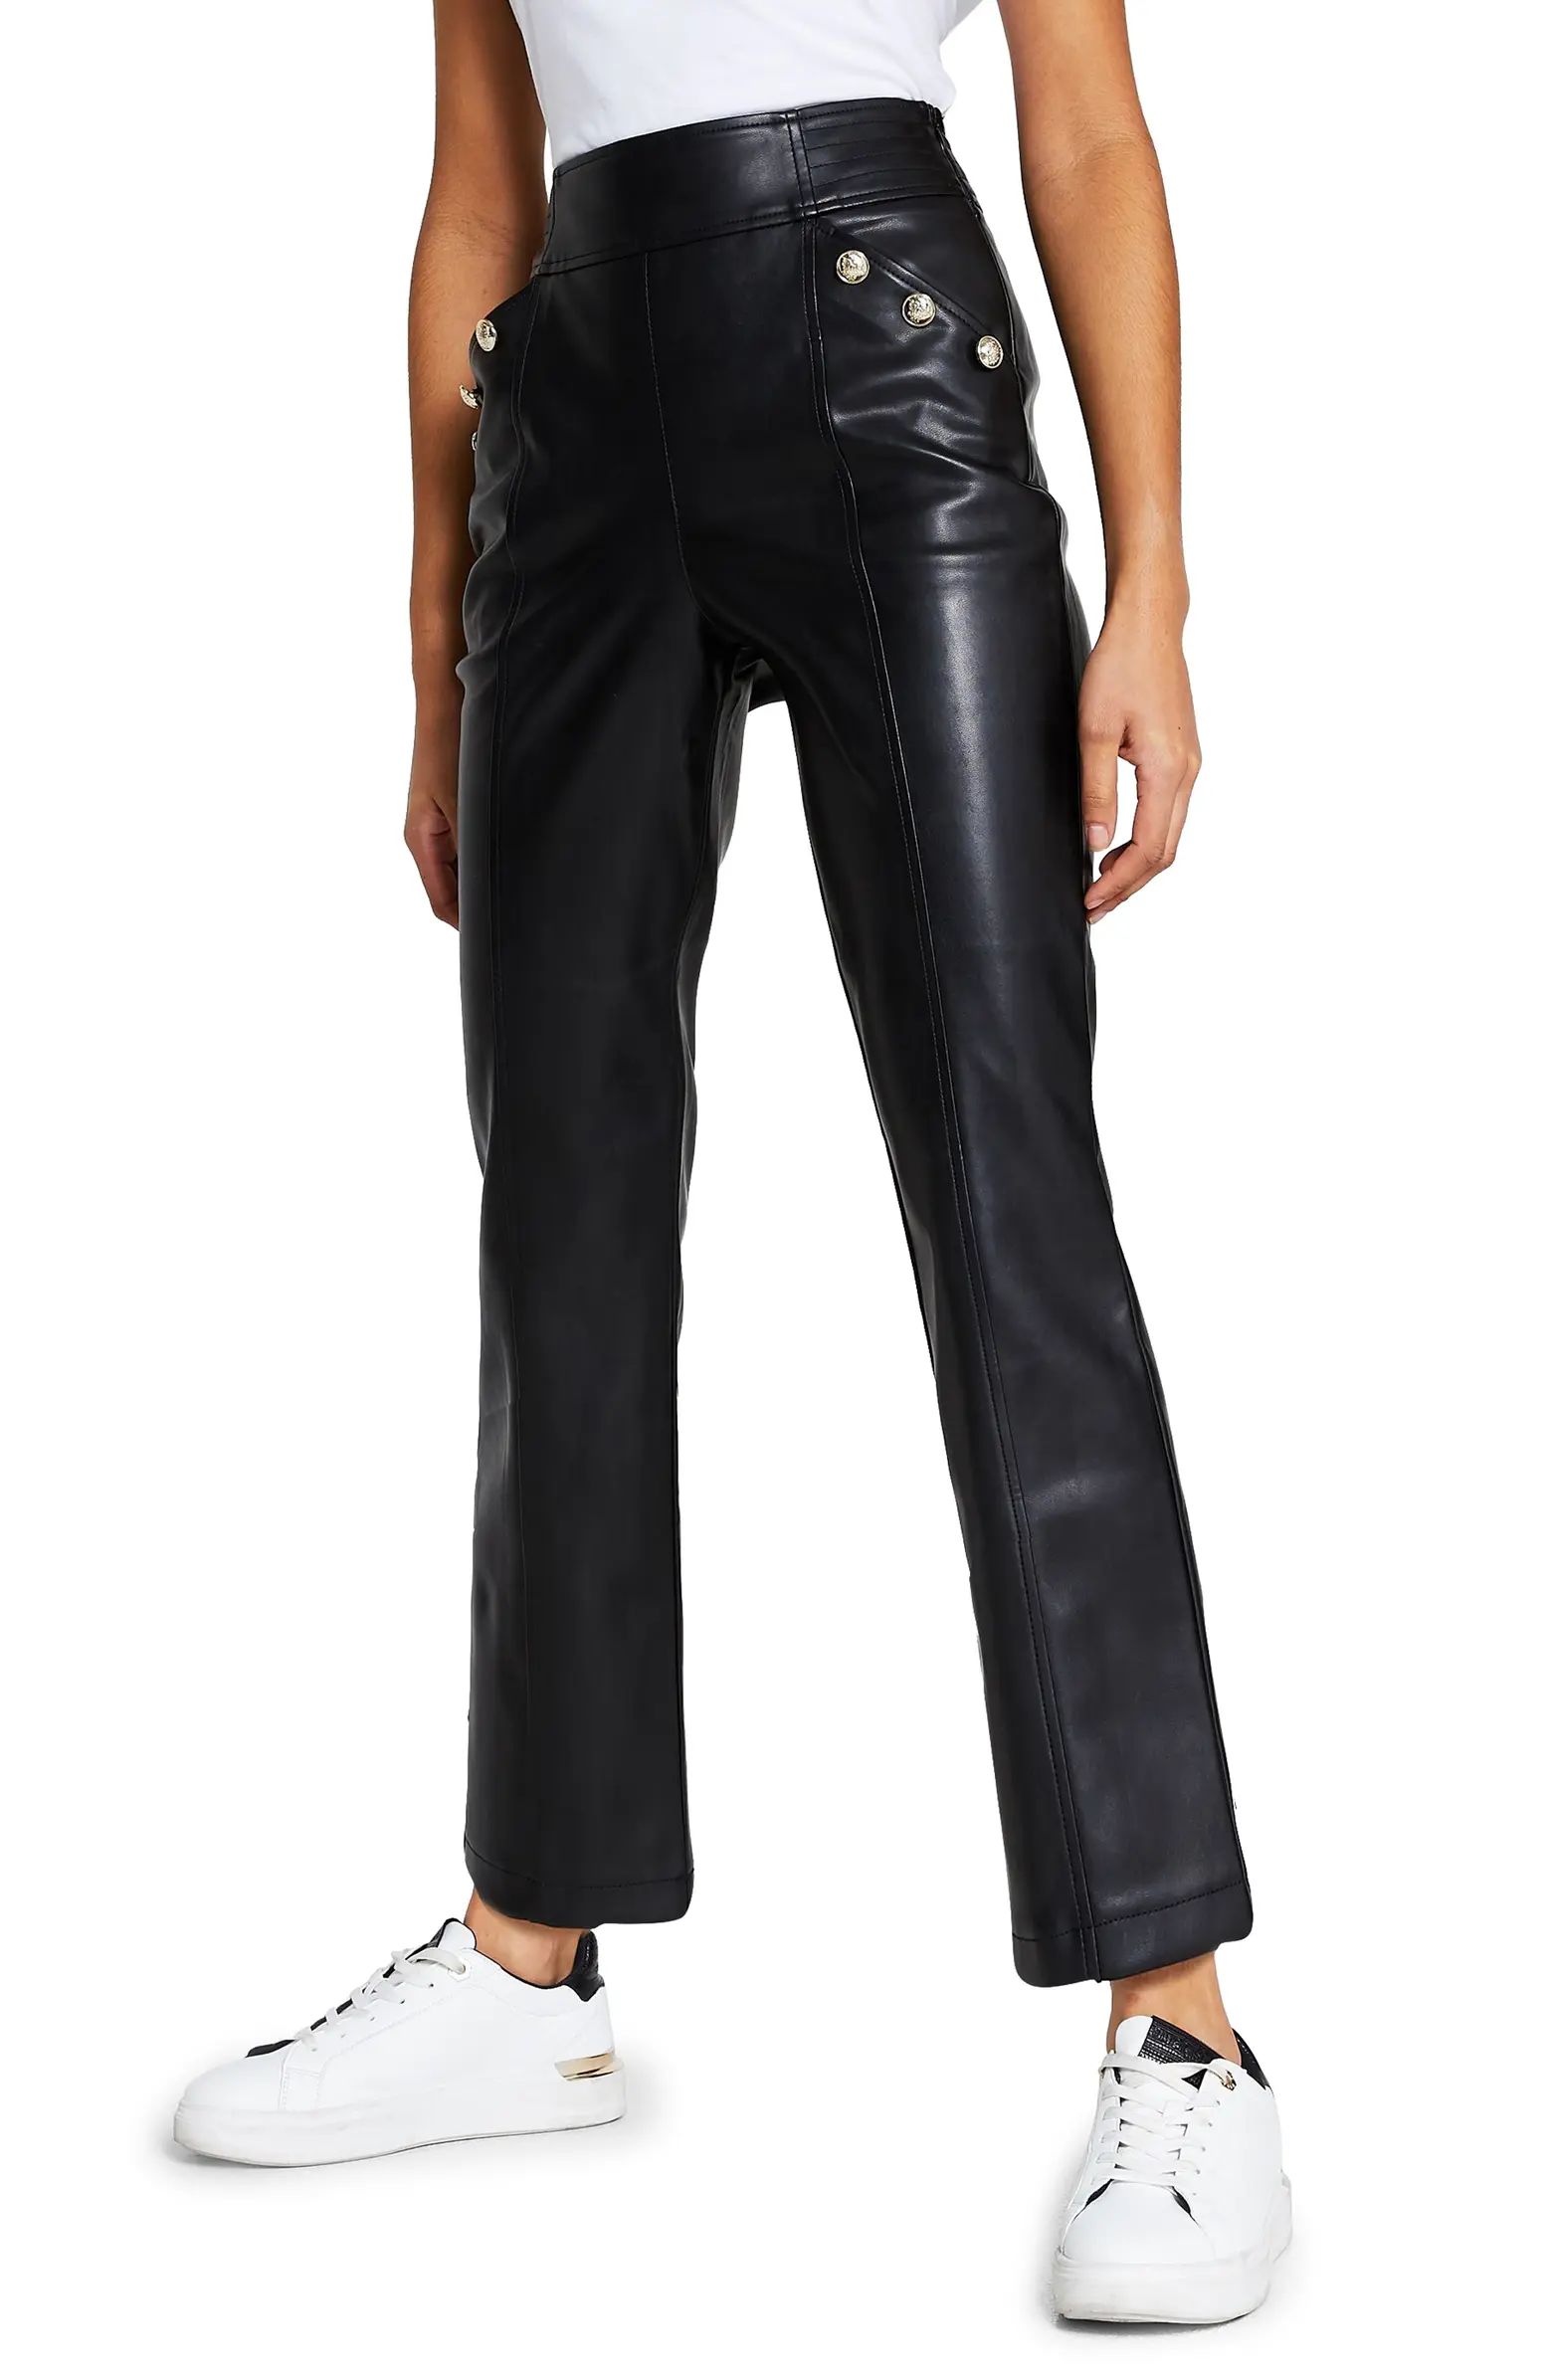 River Island Button Detail Kick Flare Faux Leather Pants | Nordstrom | Nordstrom